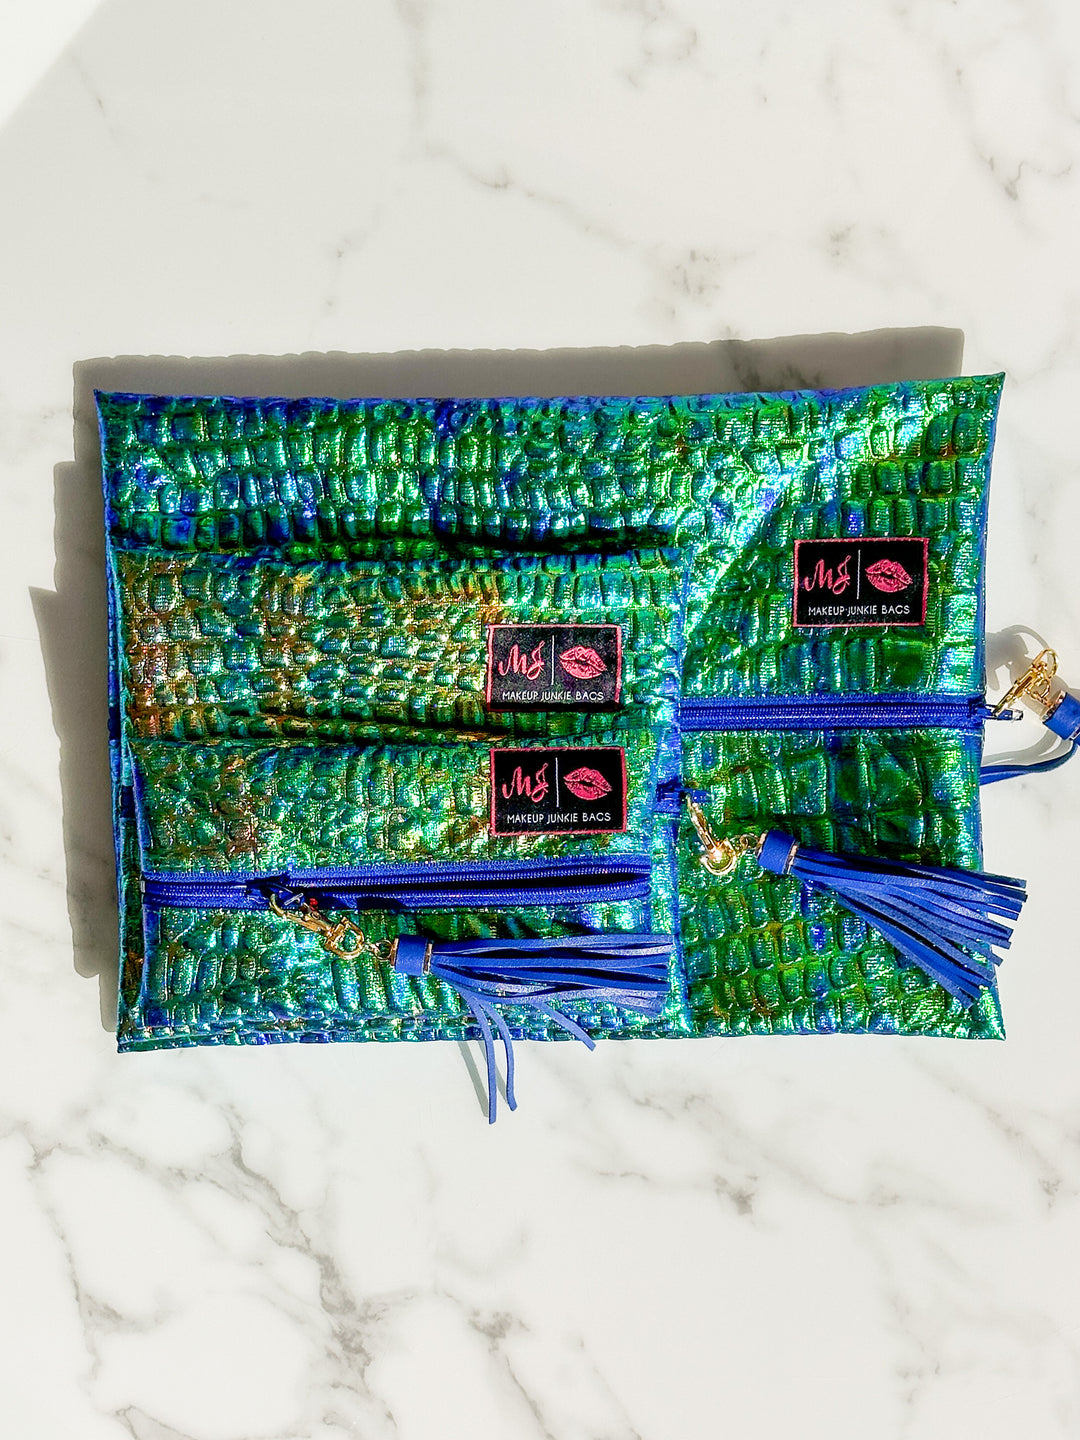 Makeup Junkie Bags - Ocean Mermaid Limited Edition [Ready to Ship]